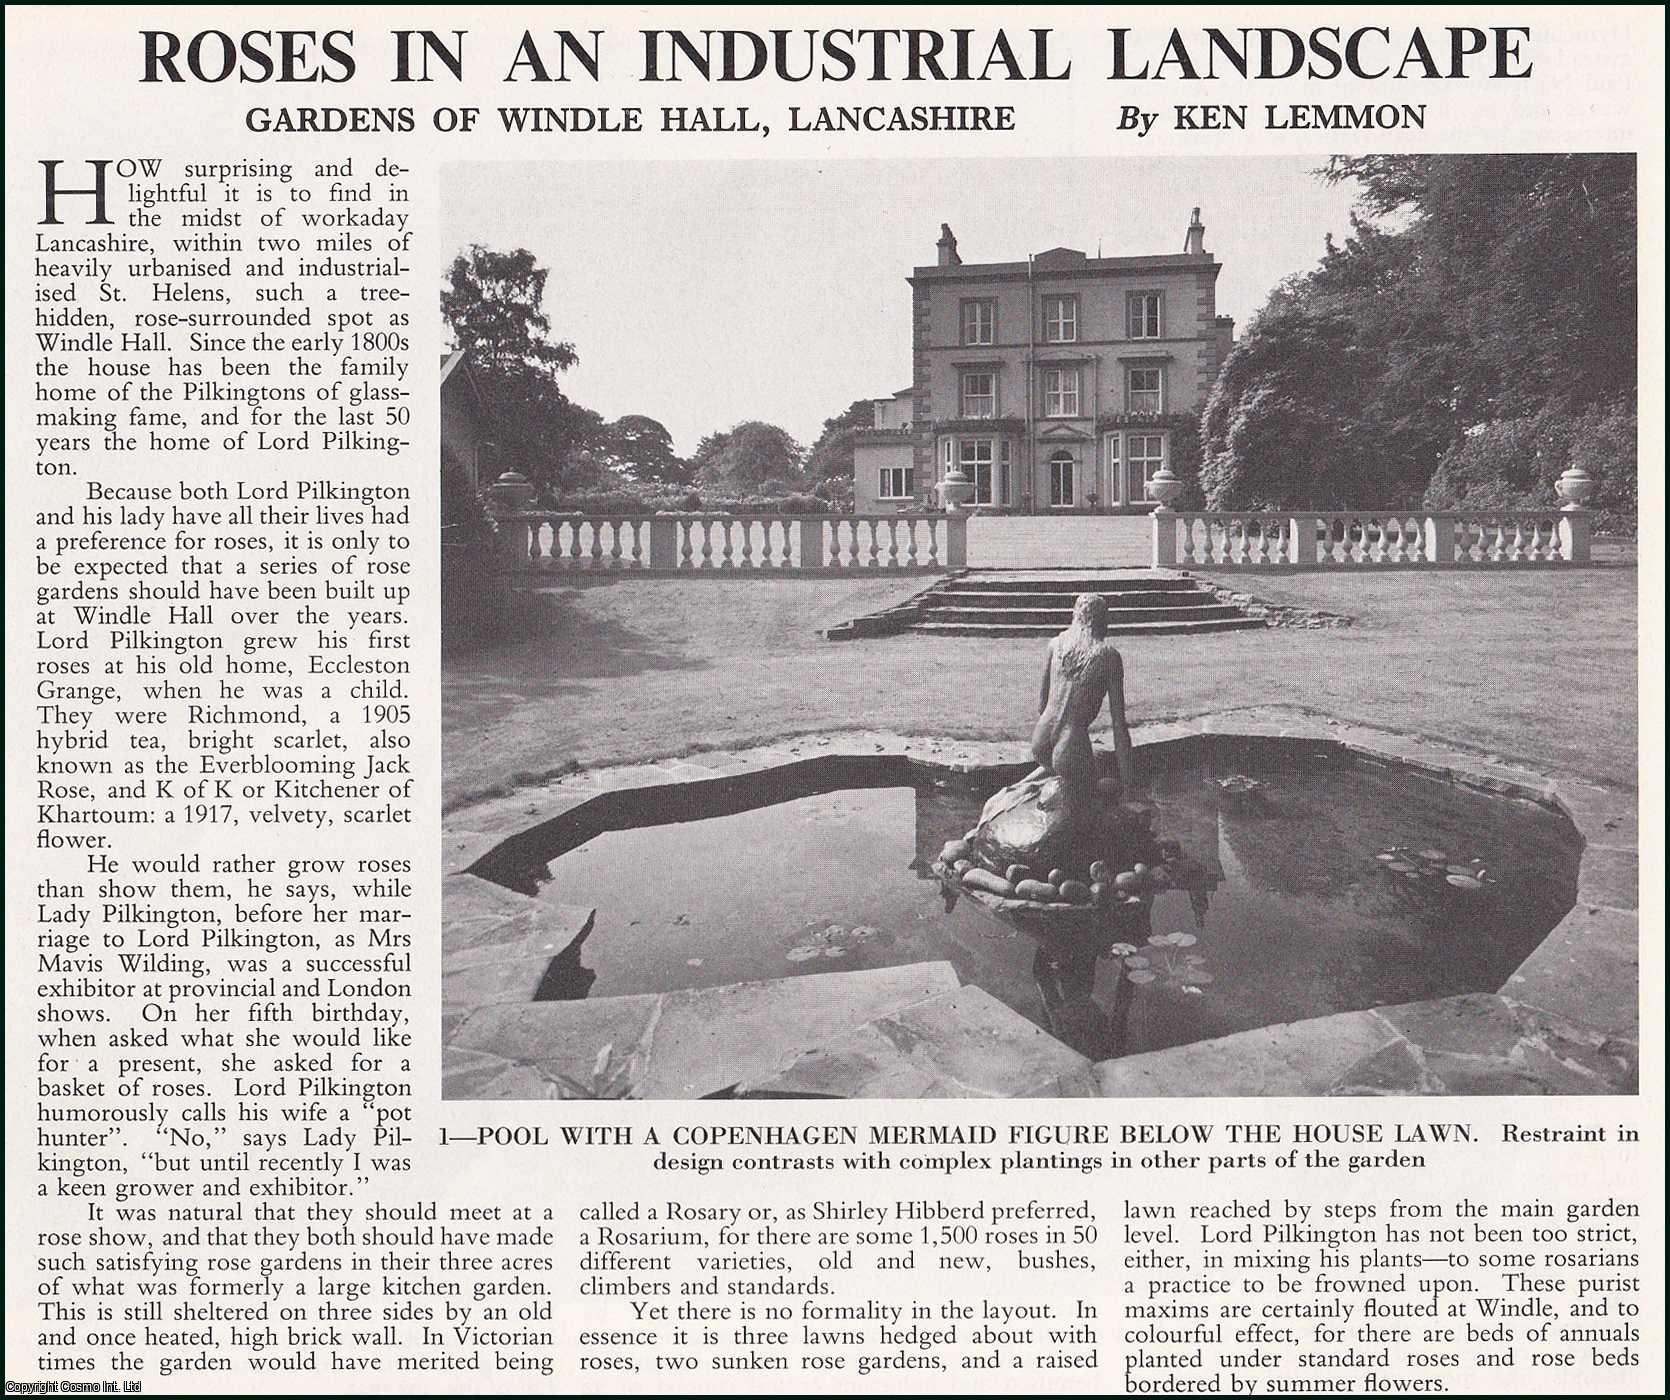 Ken Lemmon - Roses in an Industrial Landscape: Gardens of Windle Hall, Lancashire. Several pictures and accompanying text, removed from an original issue of Country Life Magazine, 1983.